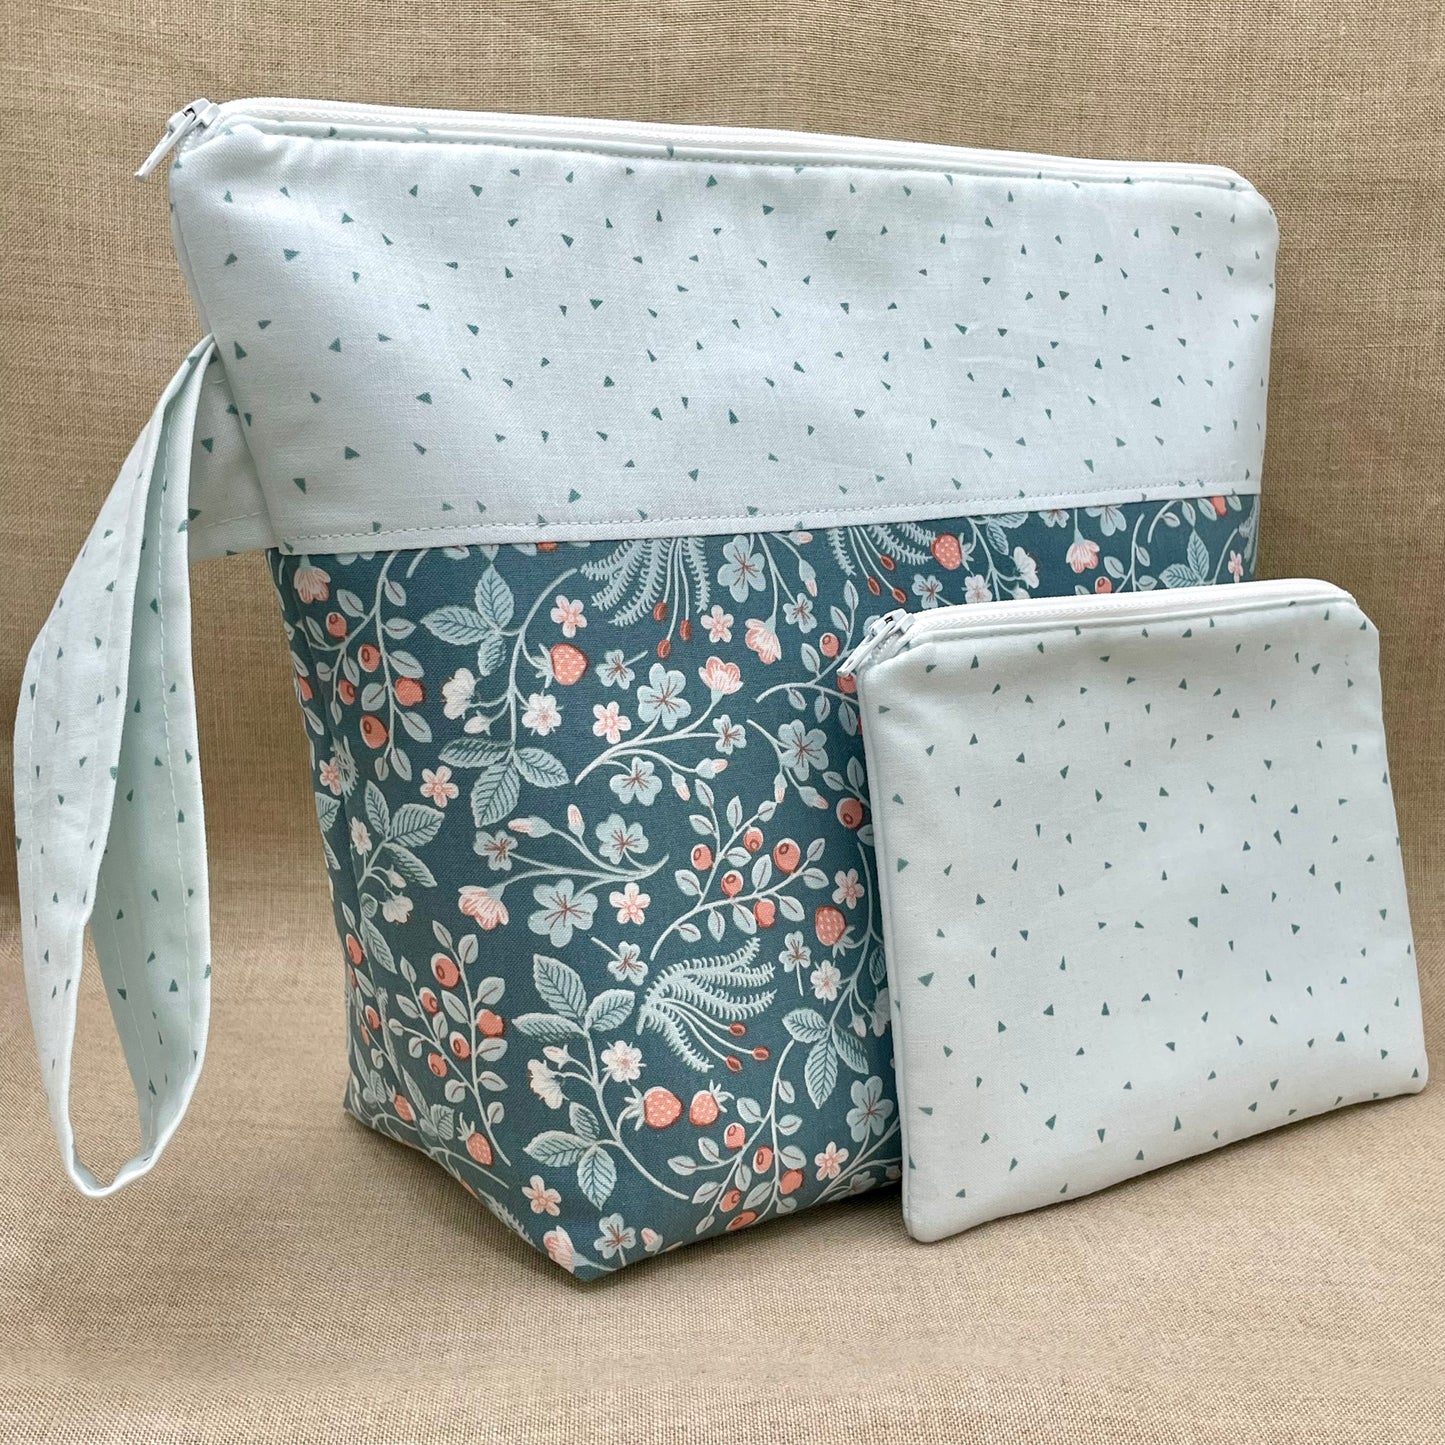 Berry Picking - Project Bag with Coordinating Notions Pouch